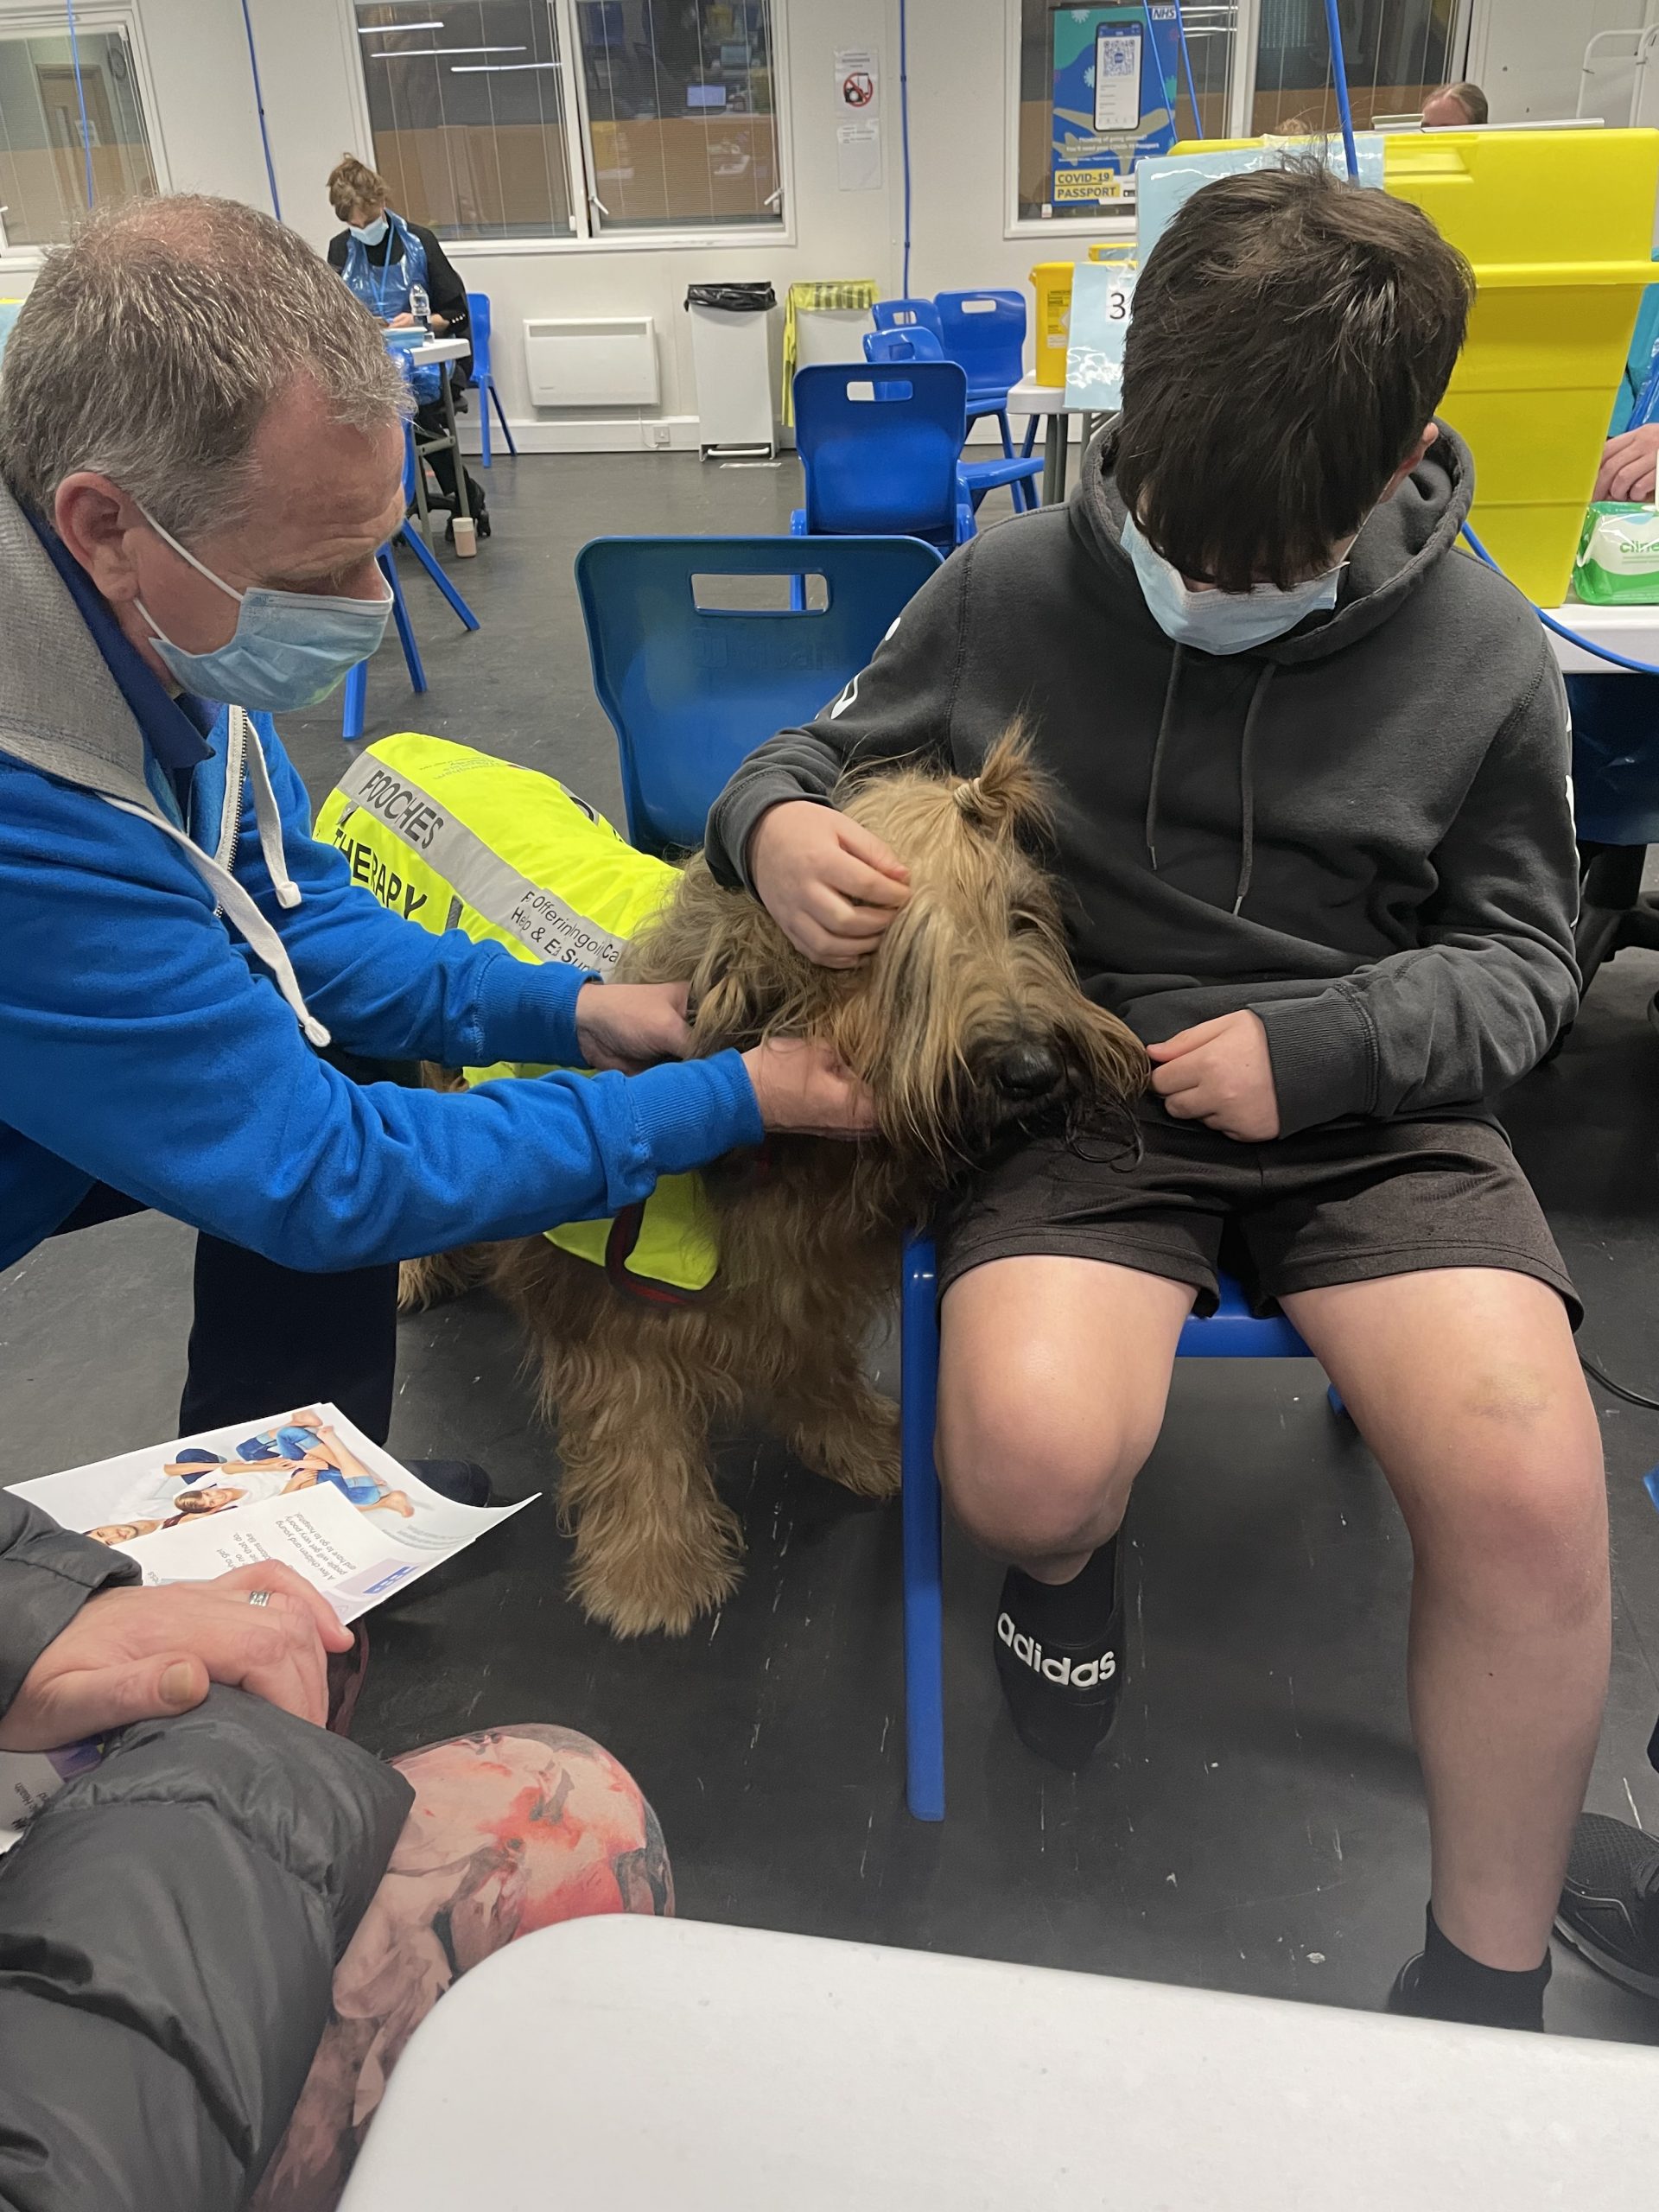 Ruby helping to put a patient at ease scaled